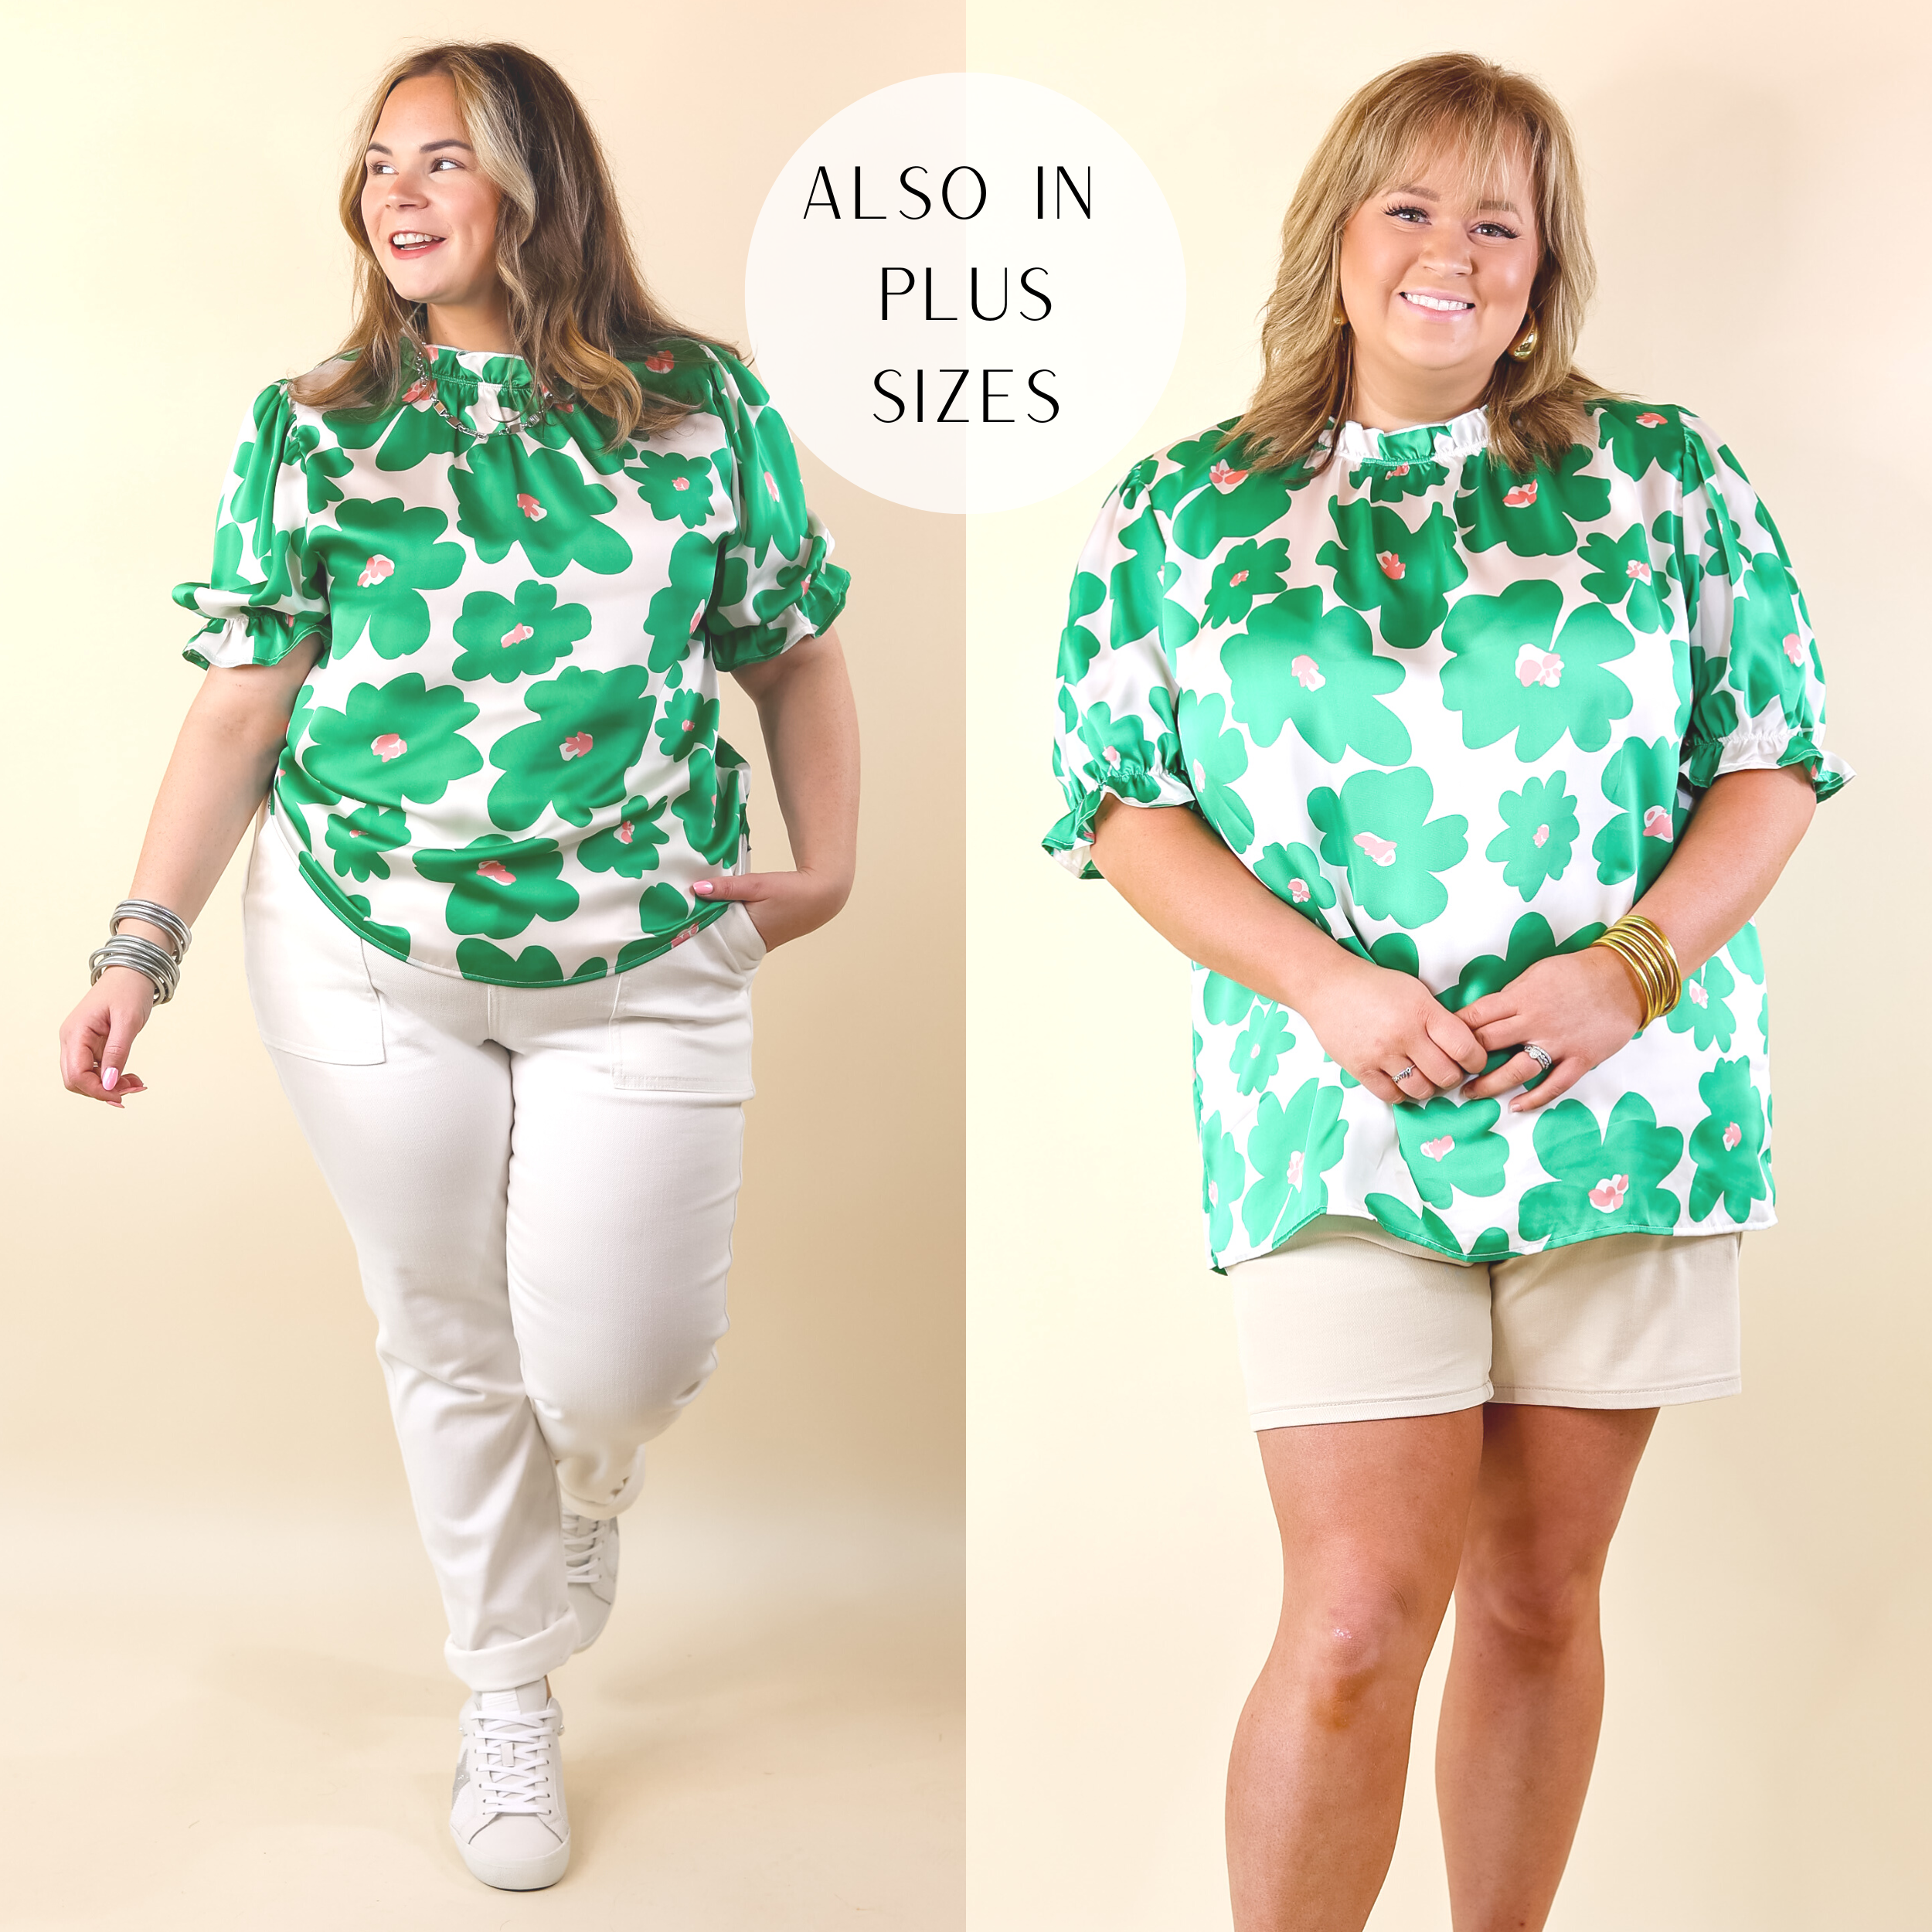 Divine Design Floral Blouse With Puffed Sleeve and Ruffle Neckline in Green - Giddy Up Glamour Boutique